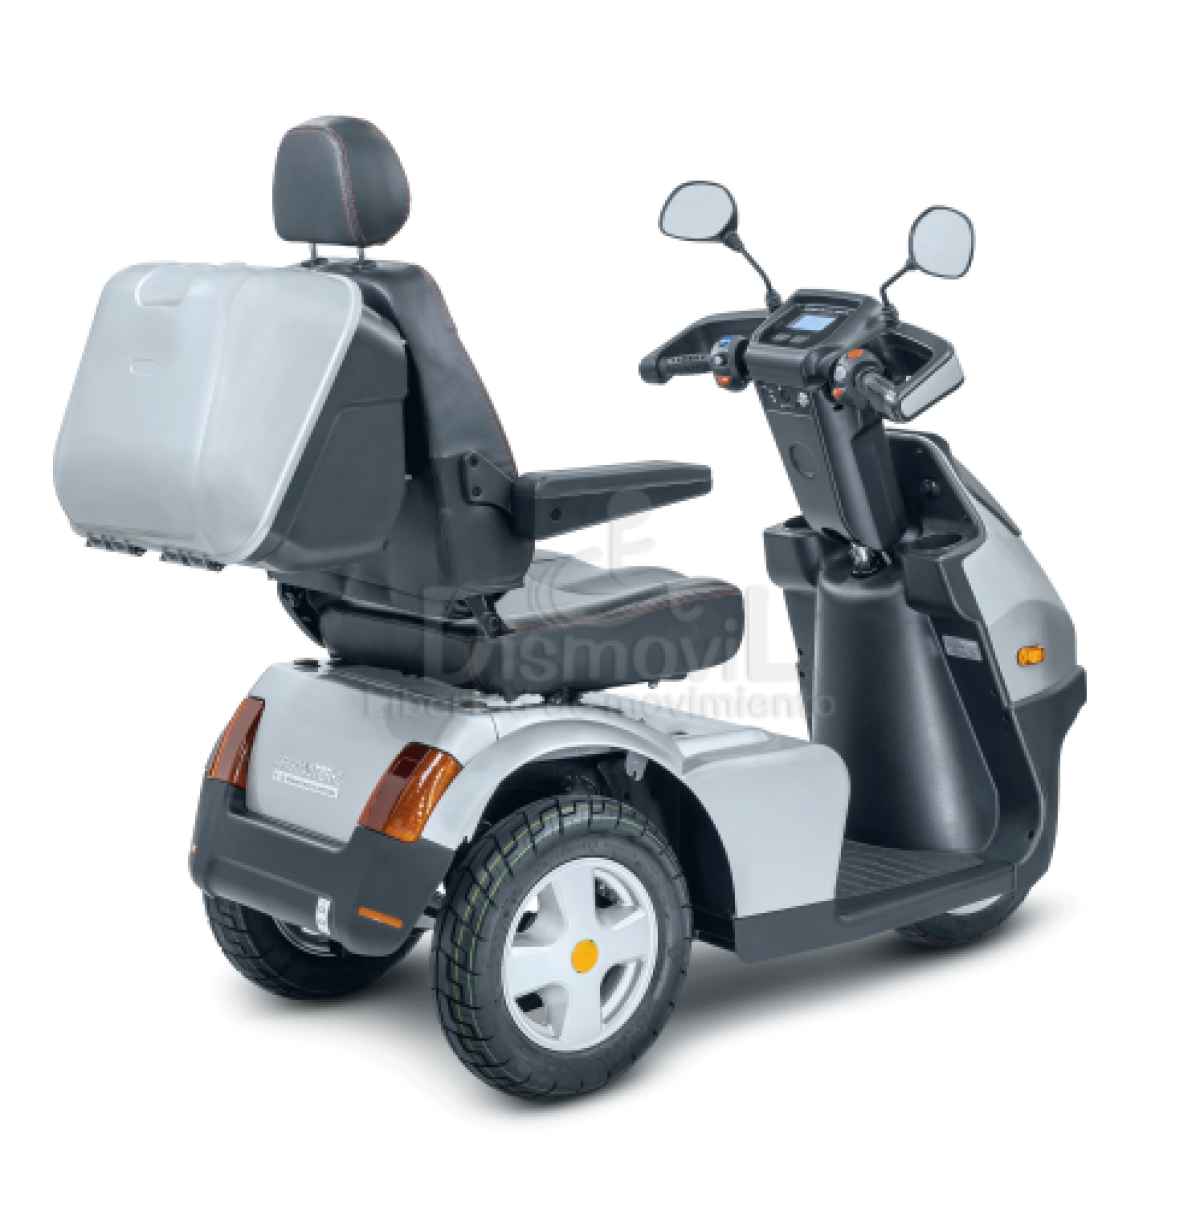 Scooter Eléctrico Minusvalidos. scooter movilidad reducid